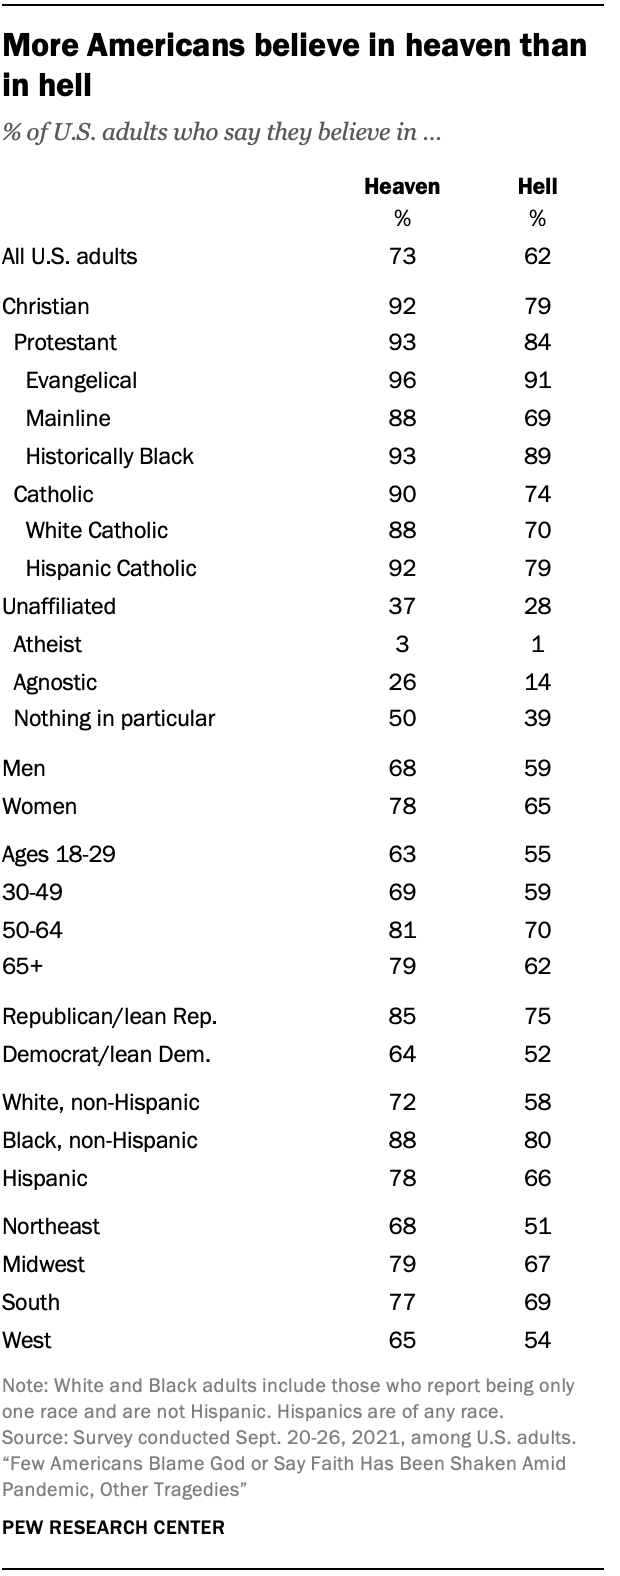 Views on the afterlife among . adults | Pew Research Center